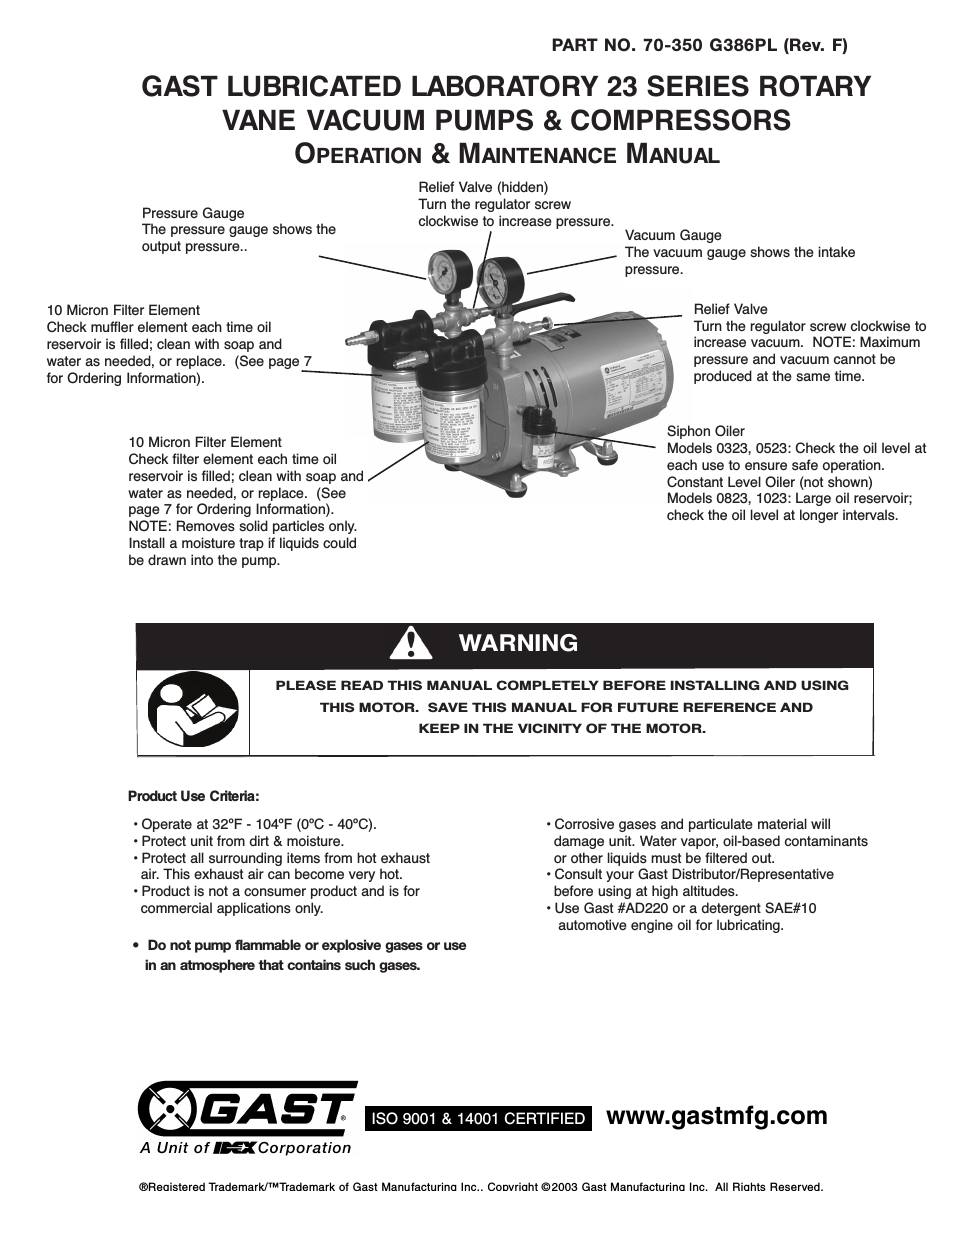 0523 Series Lubricated Laboratory Vacuum Pumps and Compressors